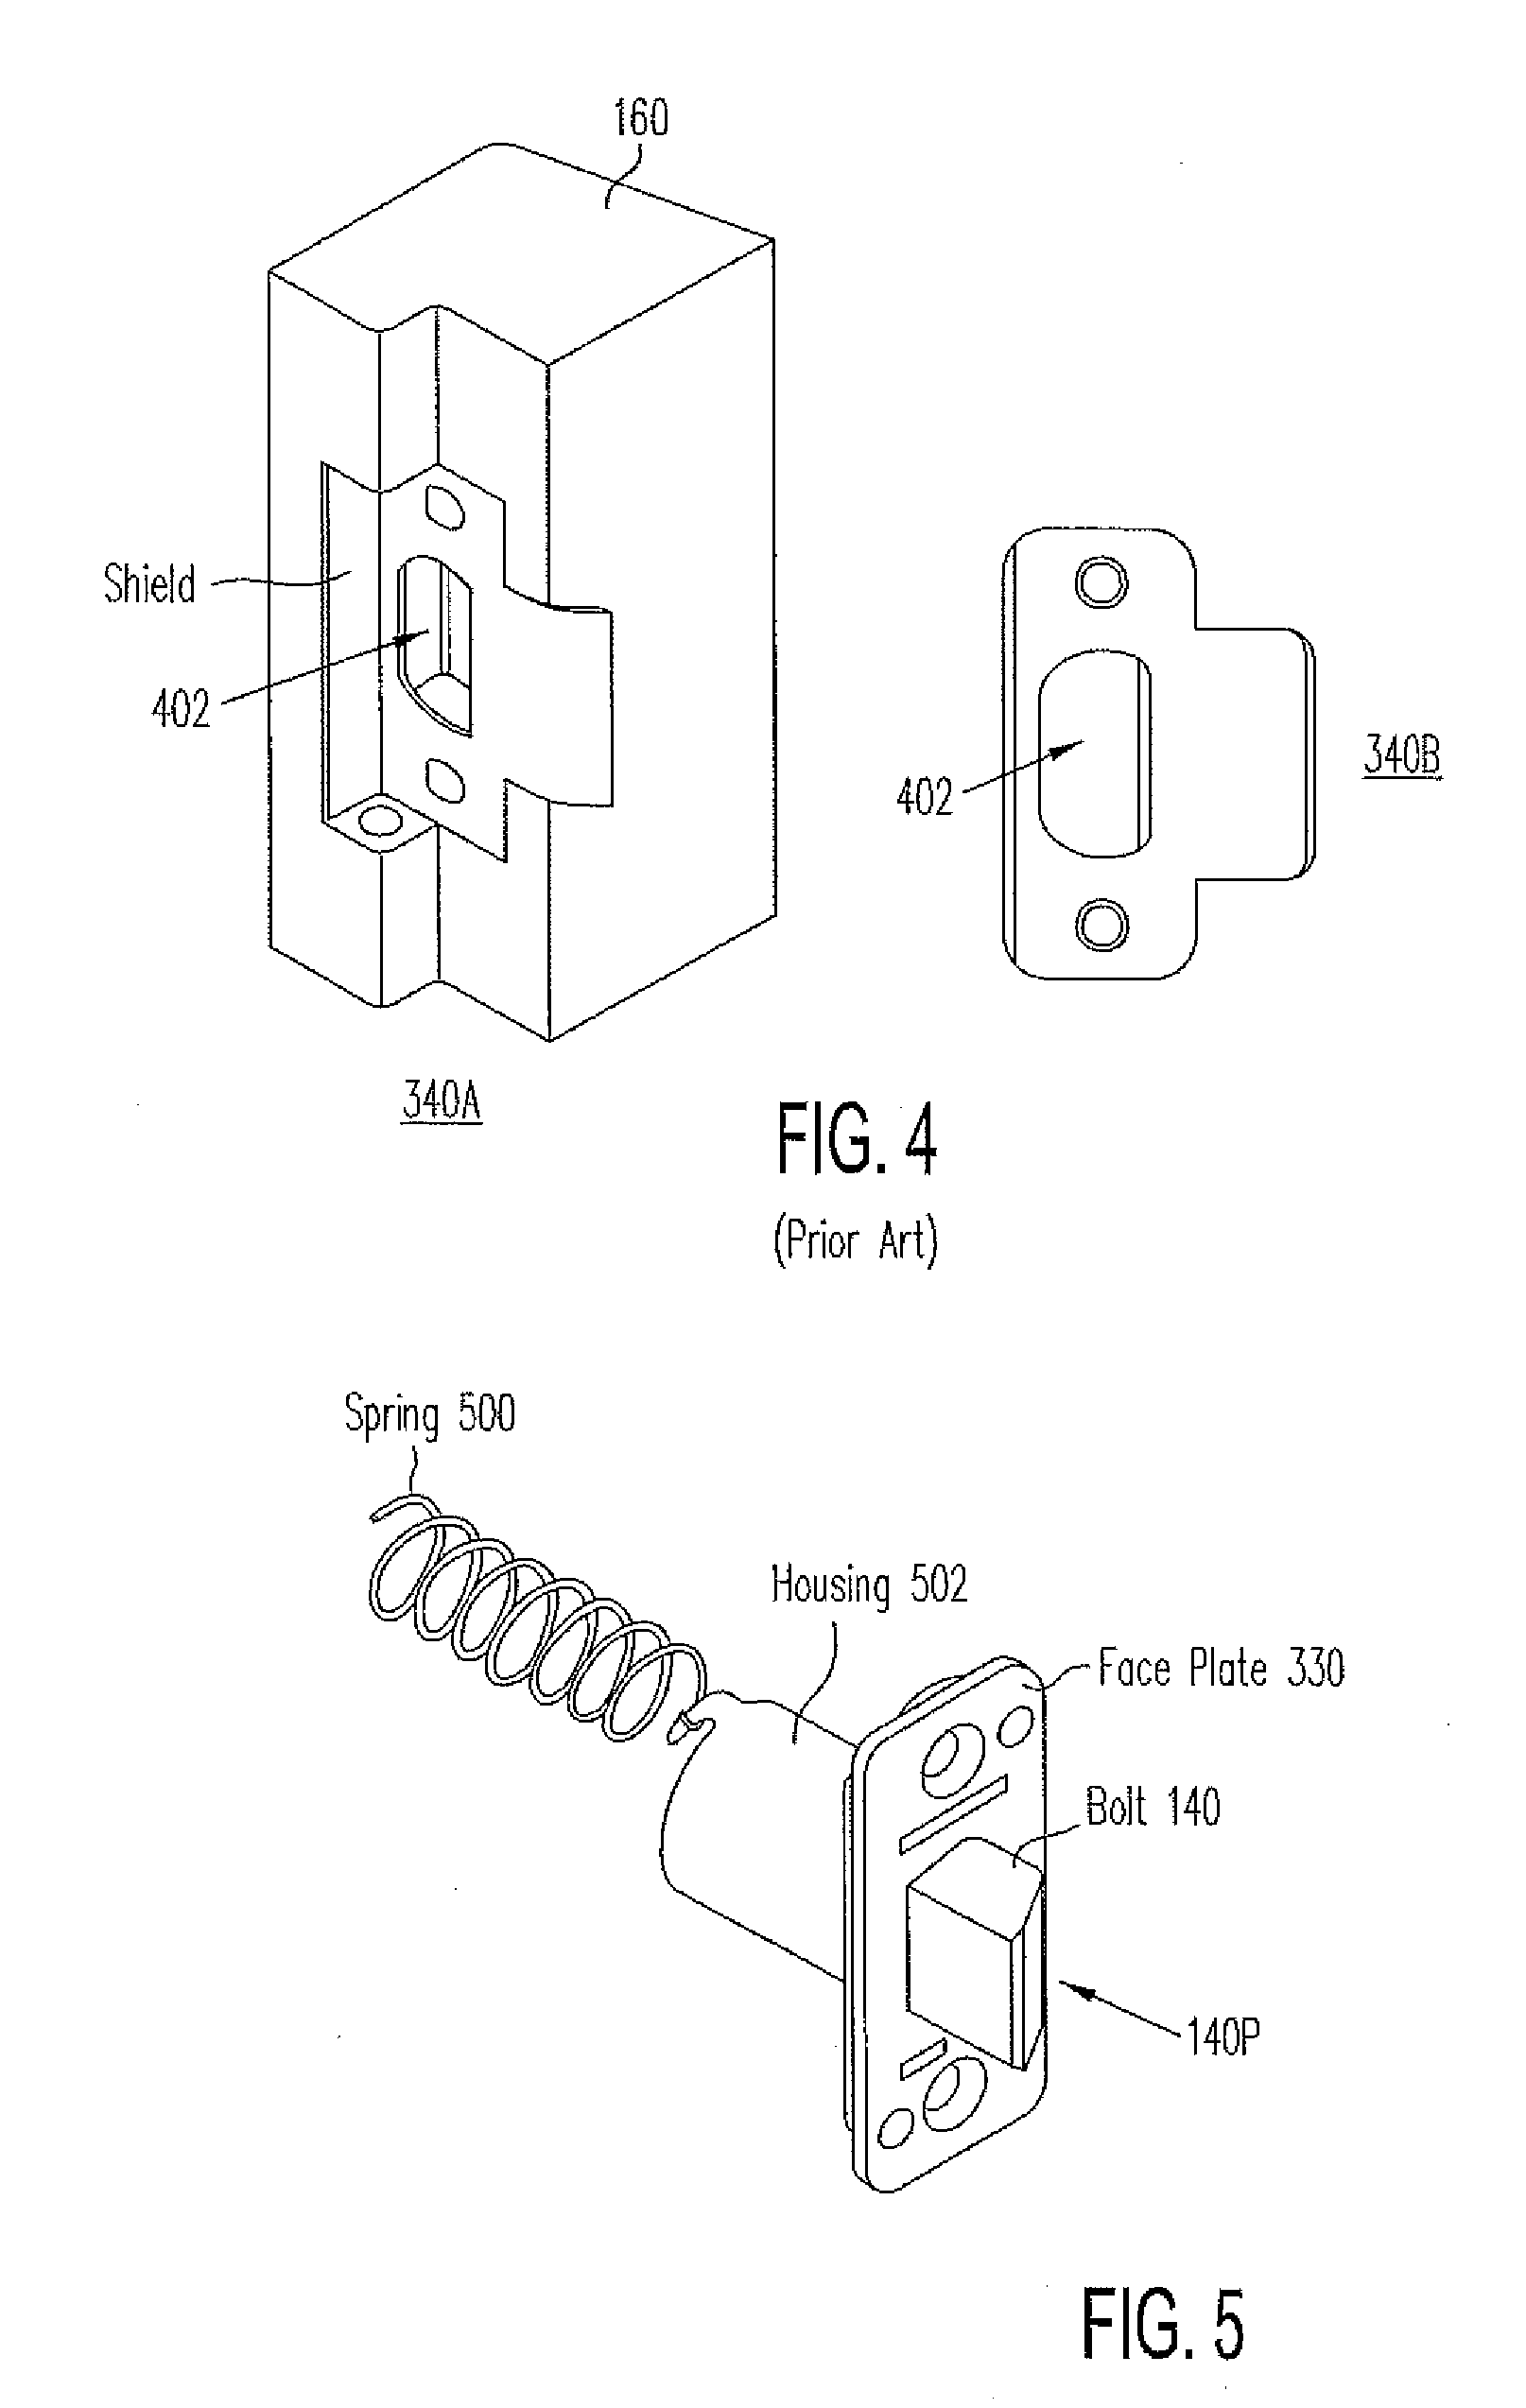 Alignment-related operation and position sensing of electronic and other locks and other objects